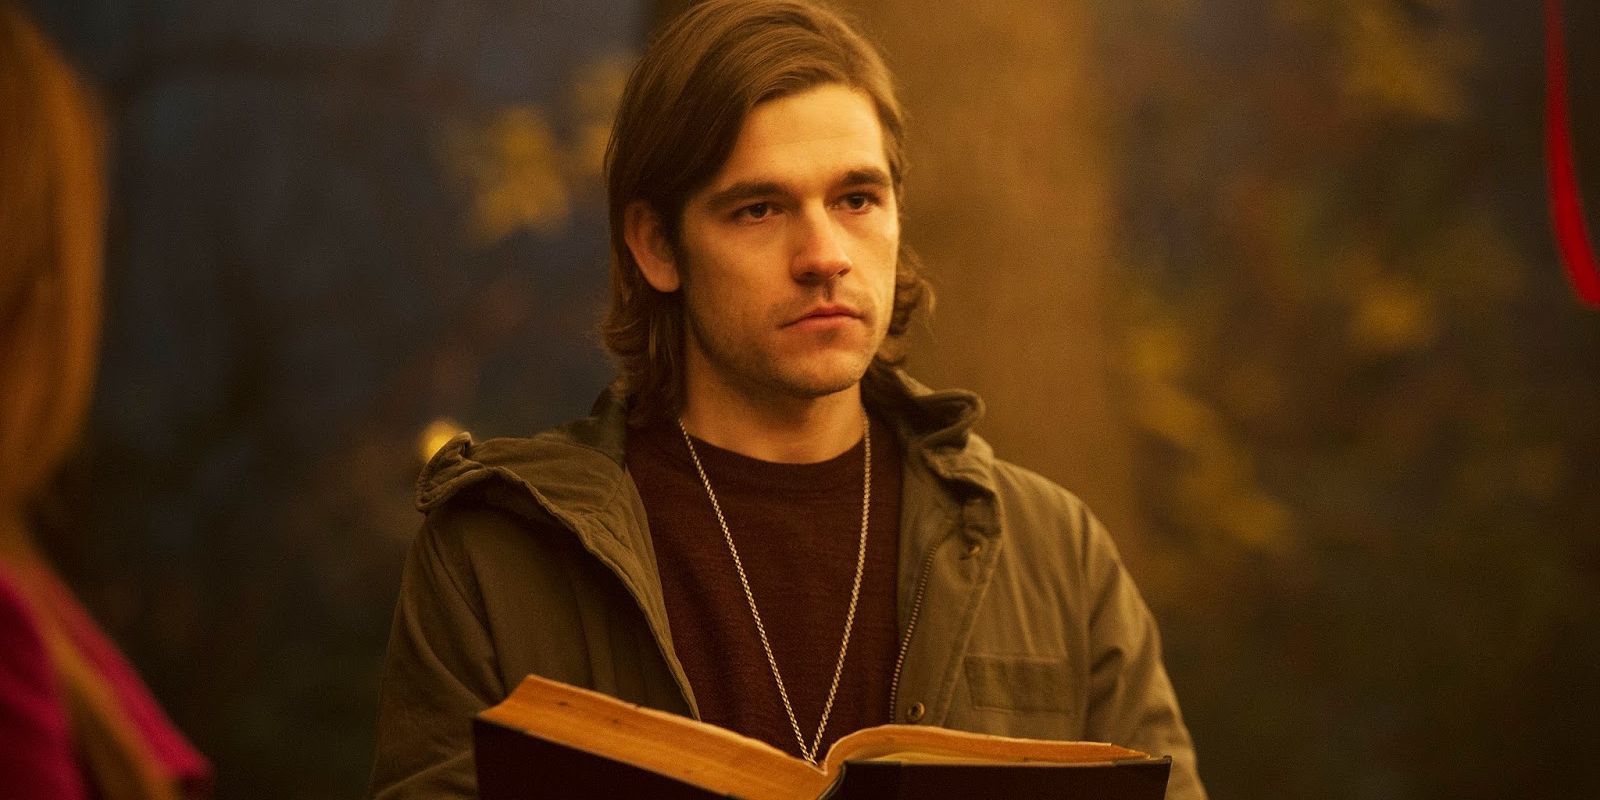 Quentin holds a book open in The Magicians.